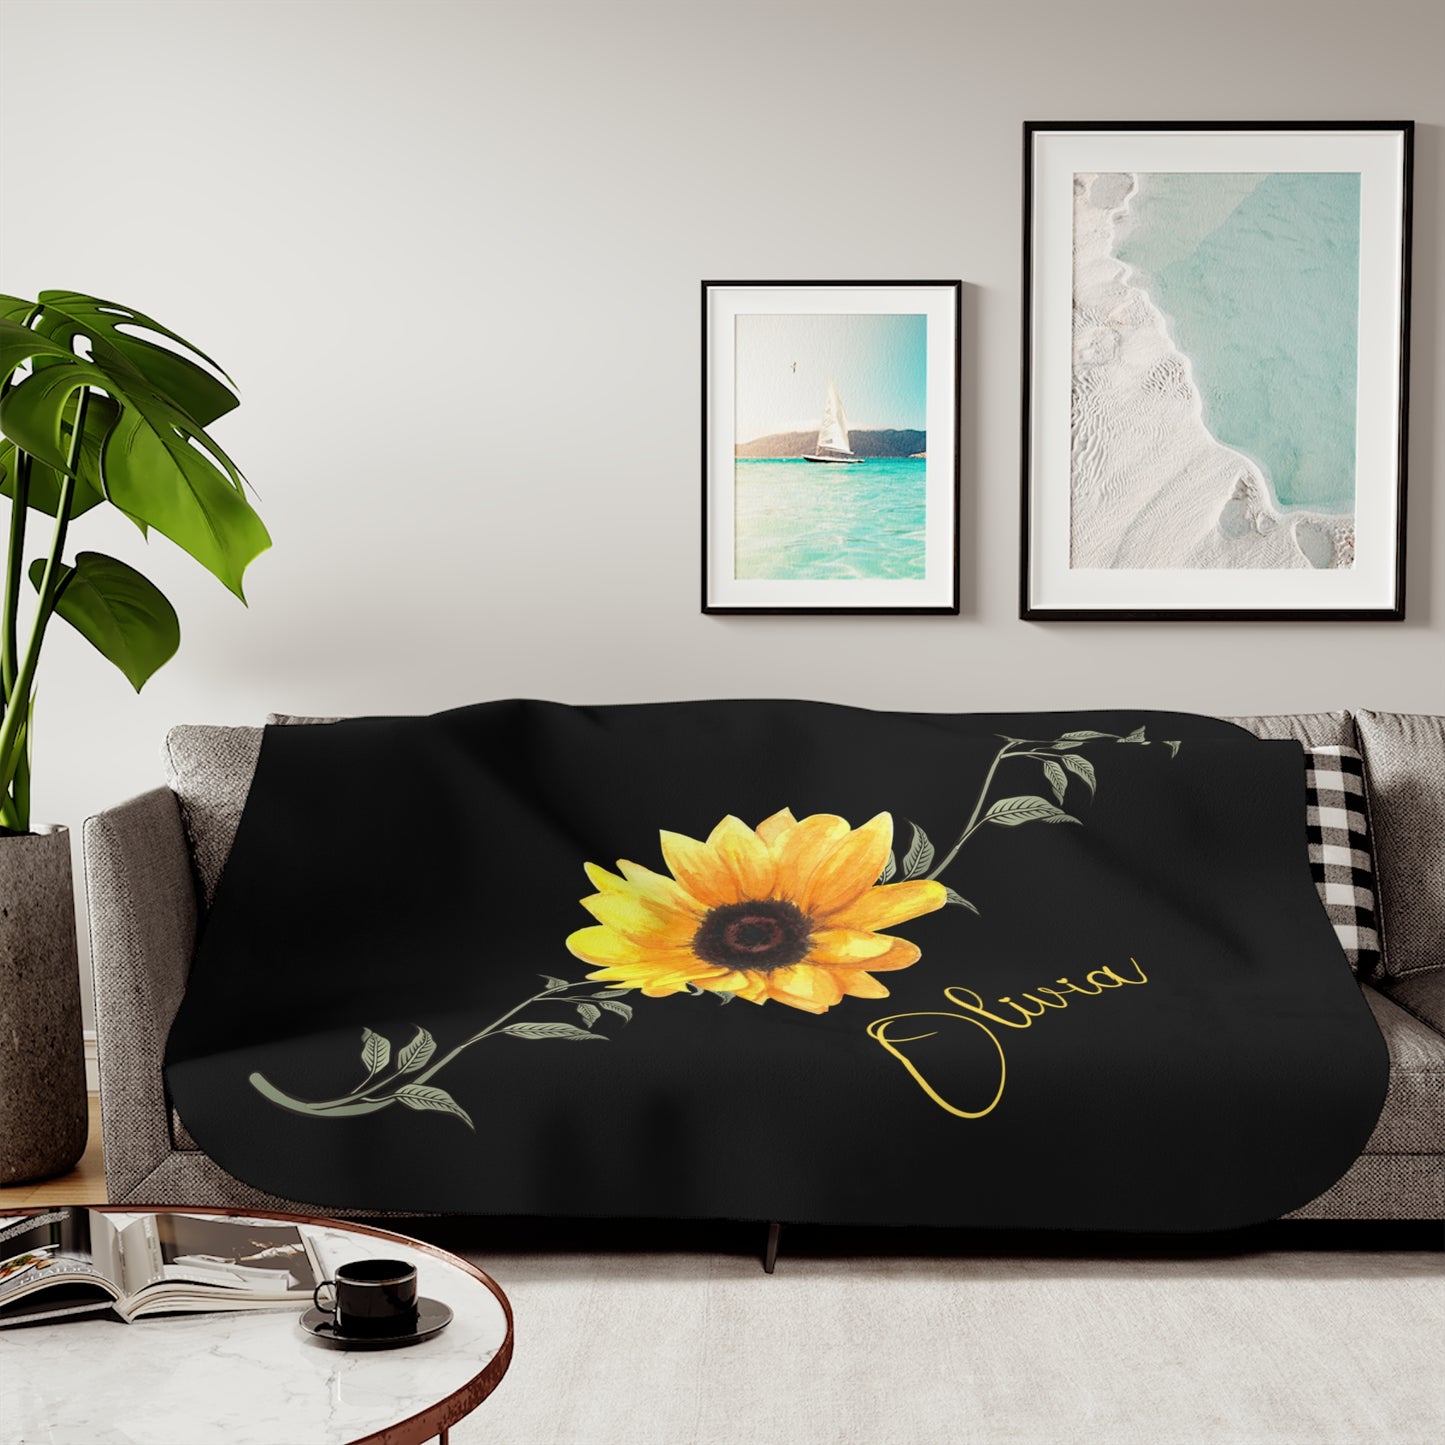 Personalized Sunflower Blanket